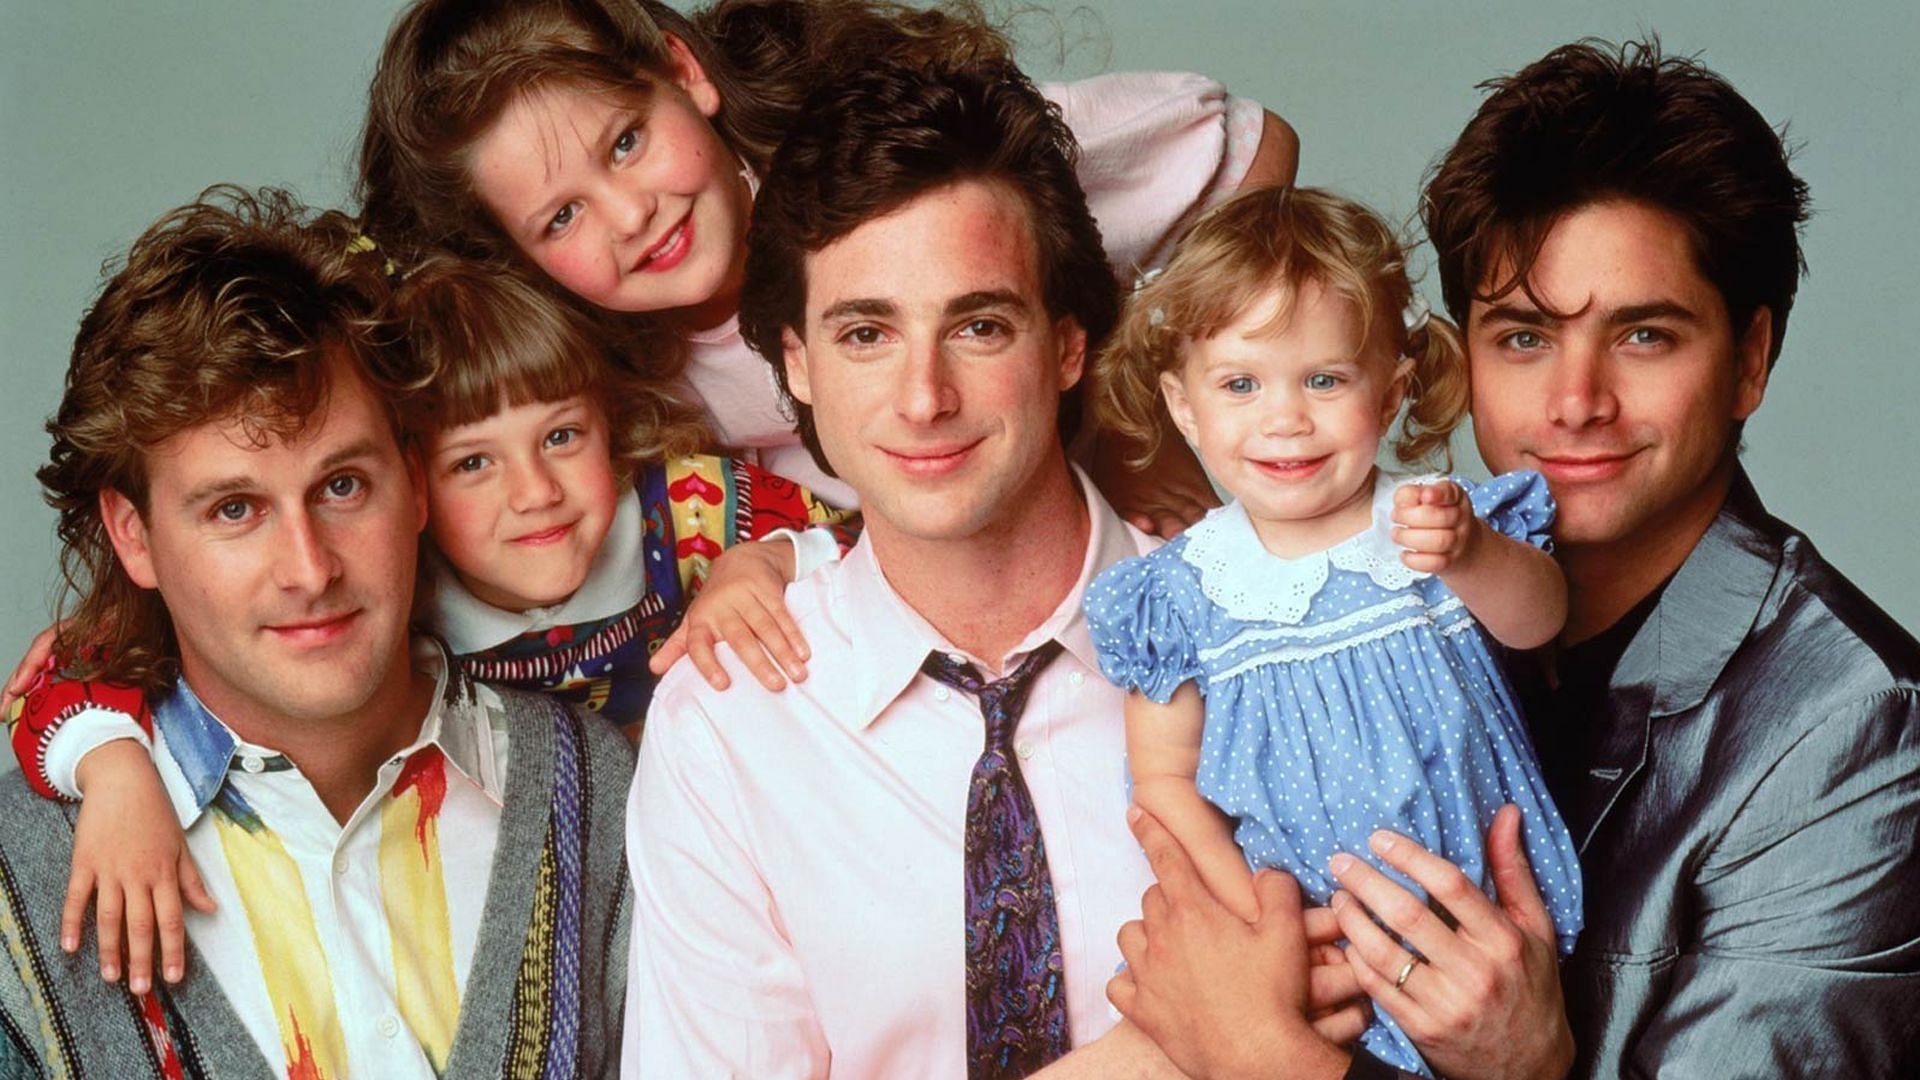 Full House reunion Date cast and more details